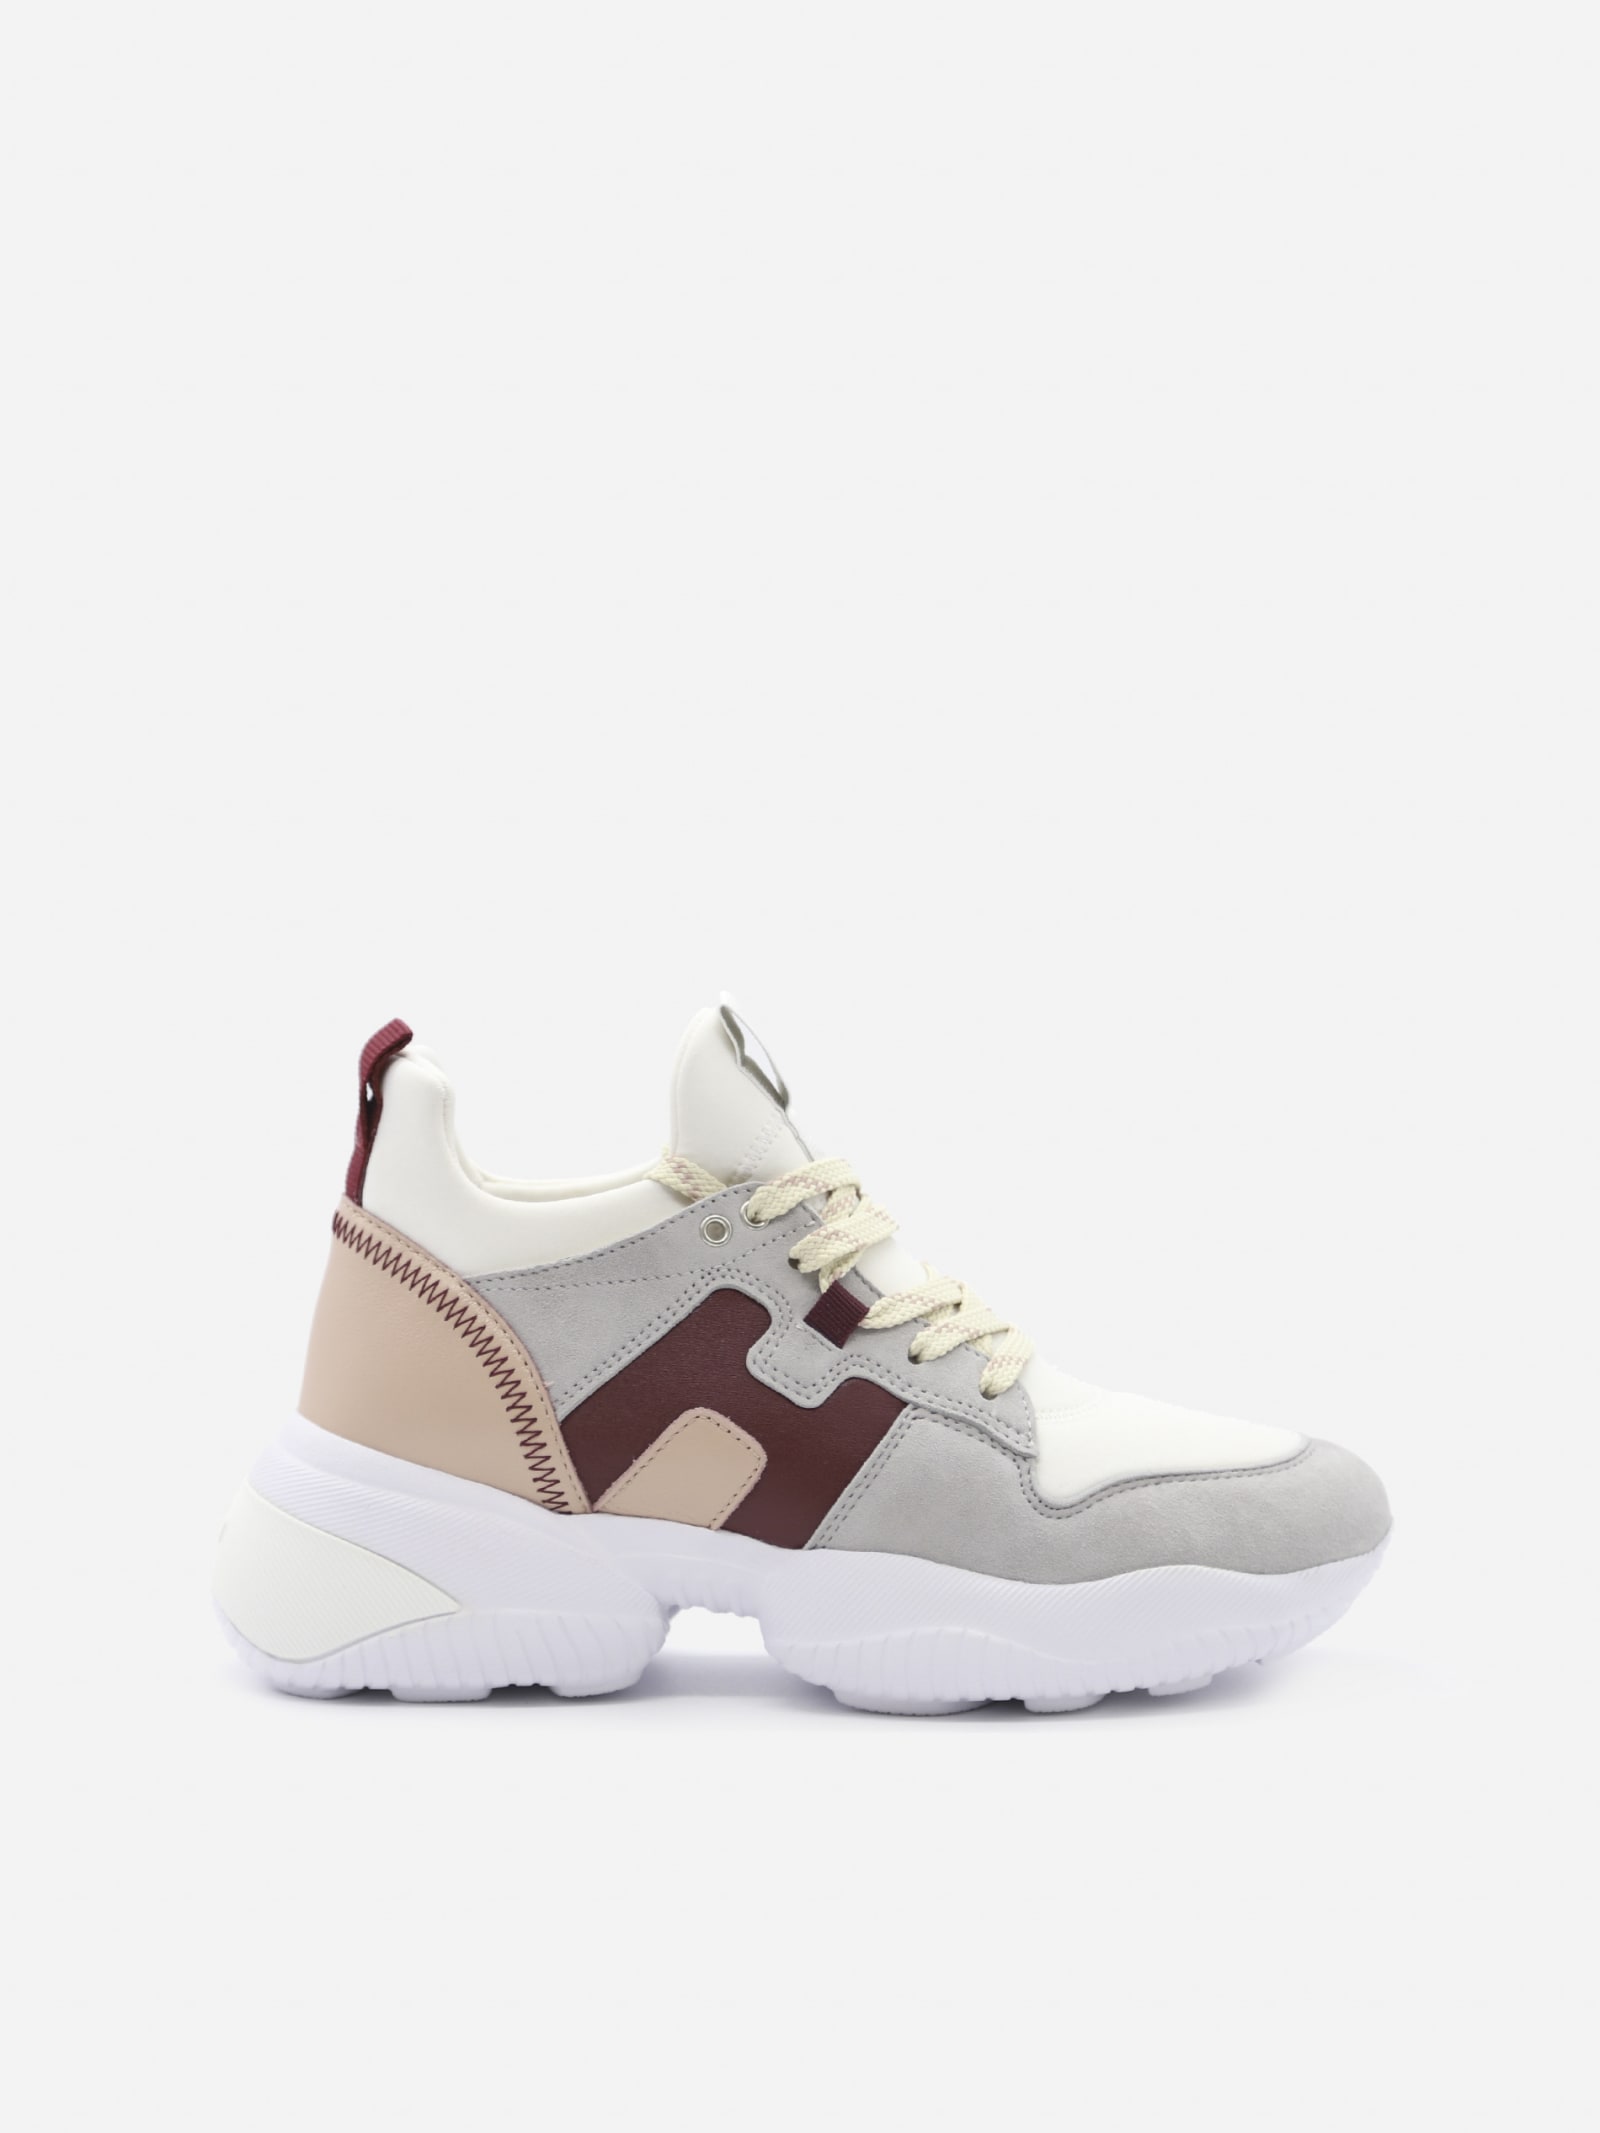 Hogan Interaction Sneakers In Leather And Suede